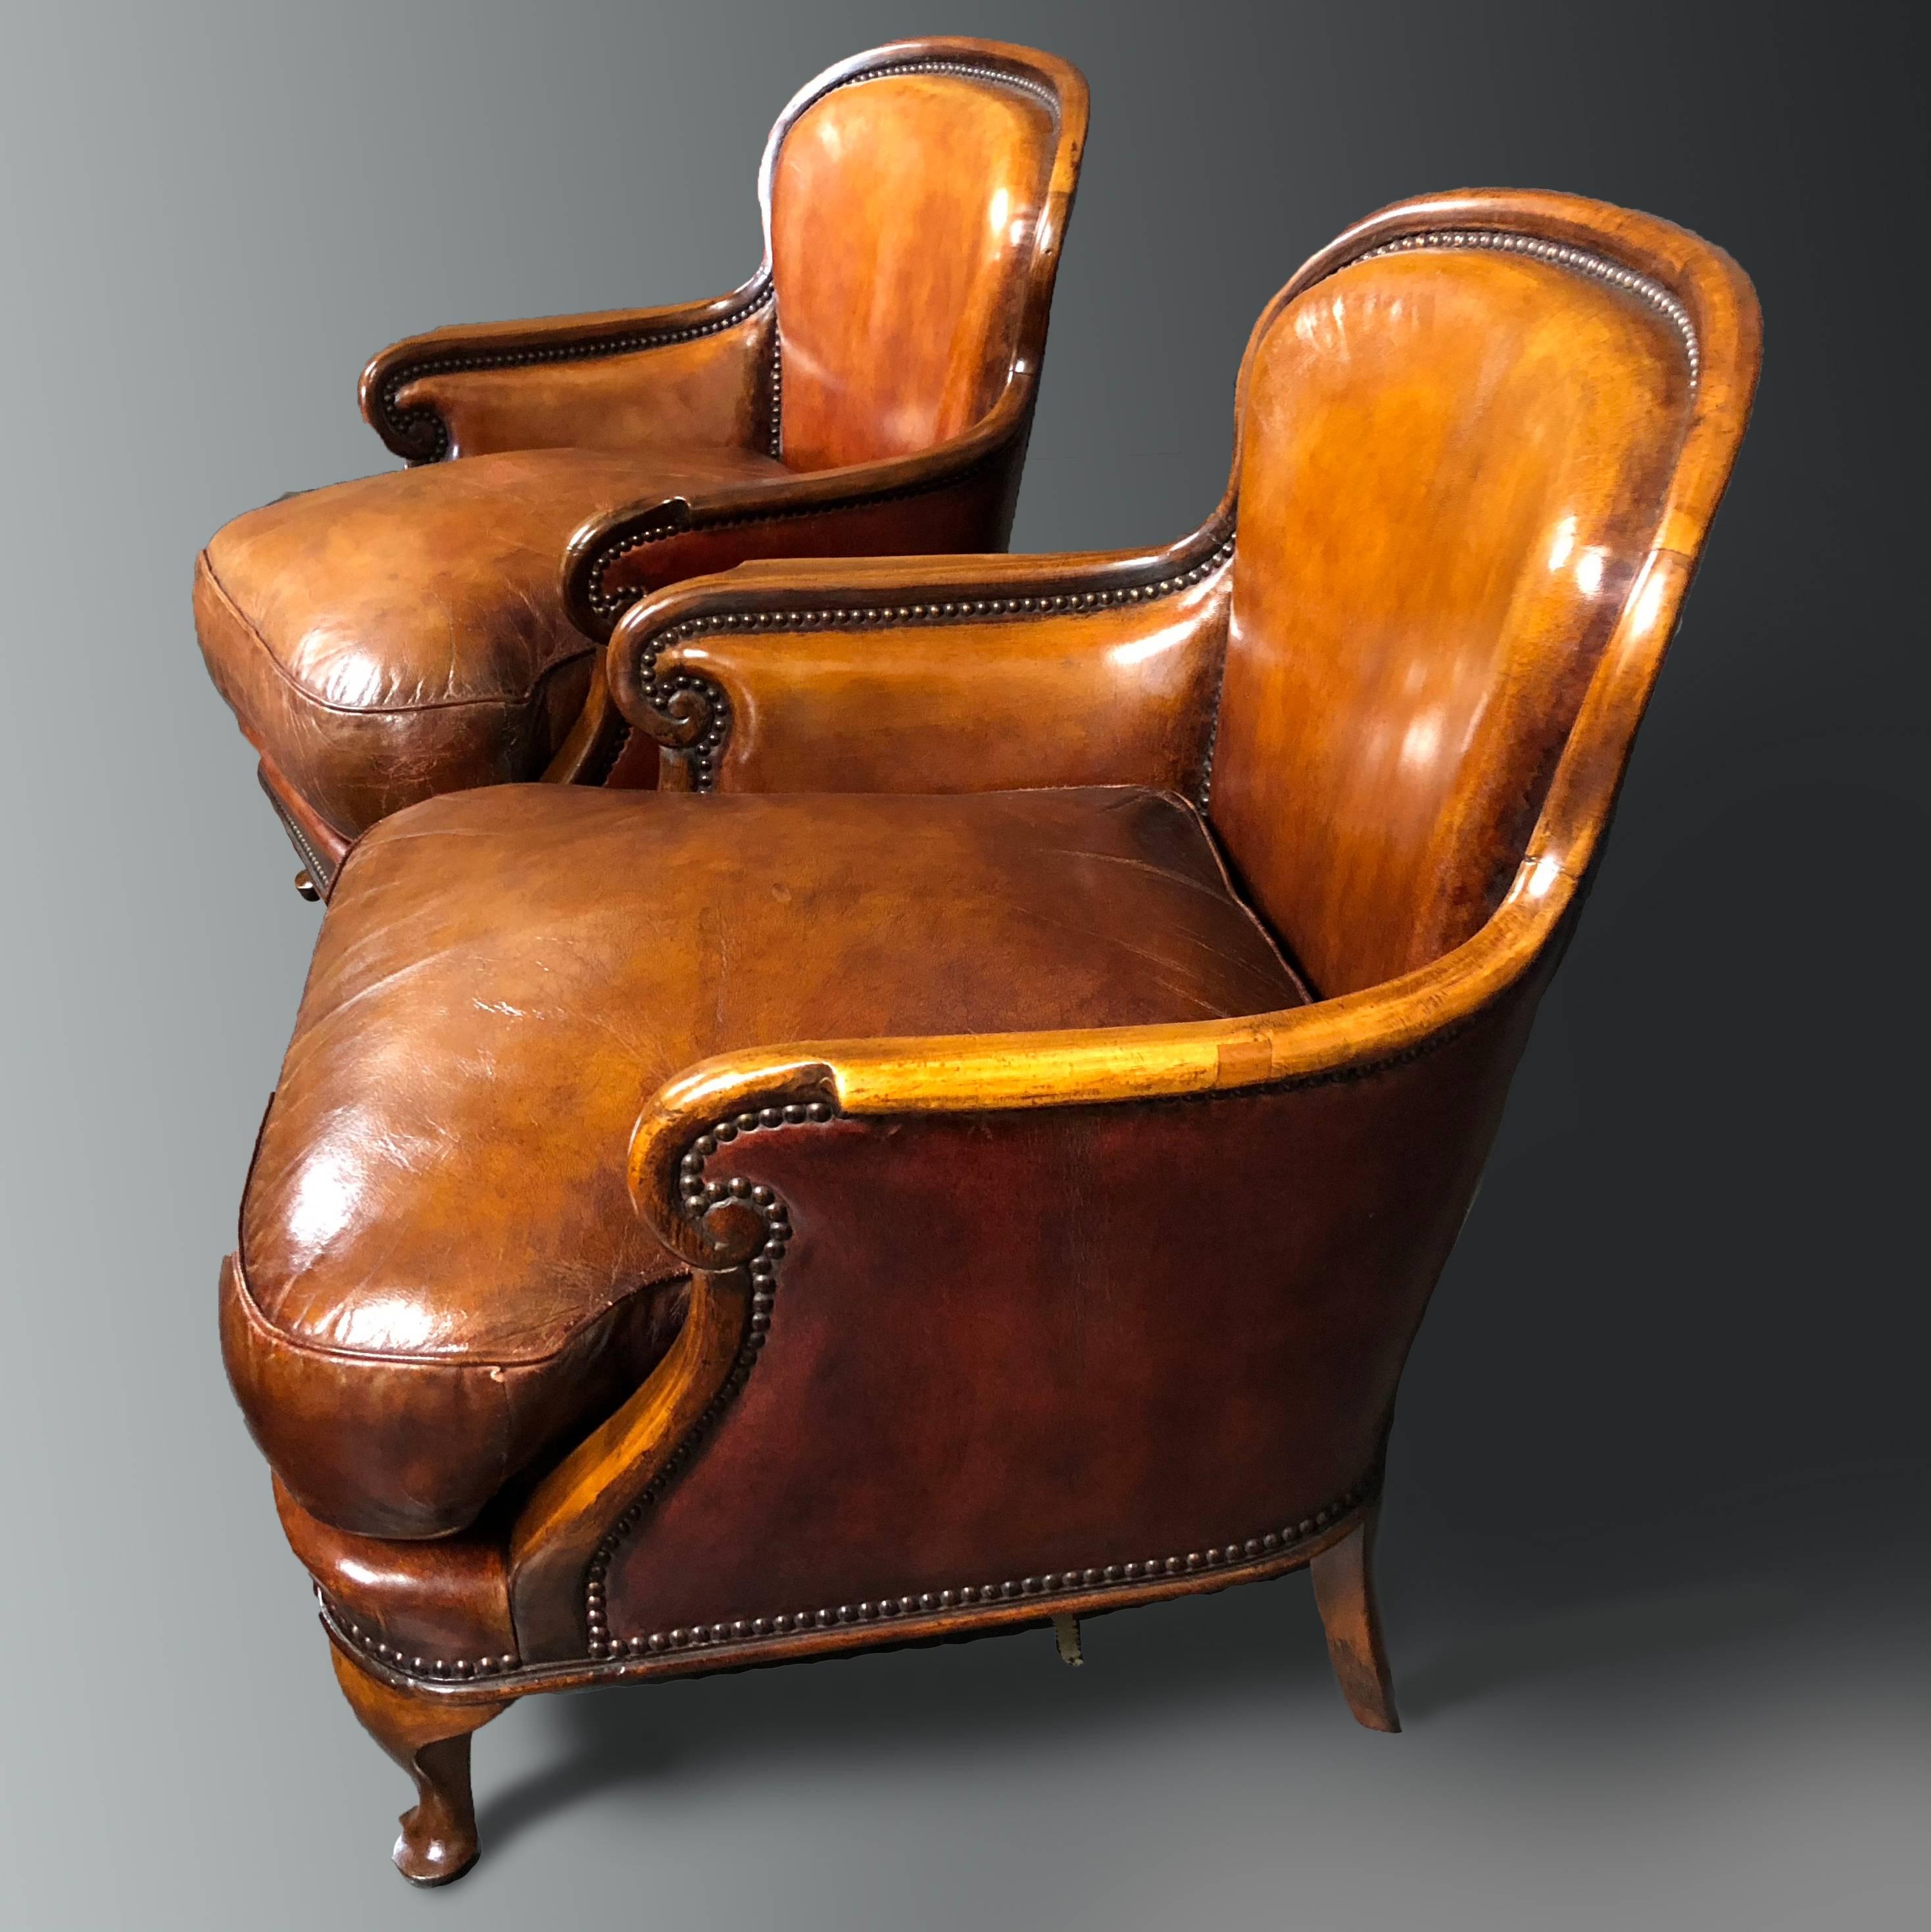 Attractive pair of small English antique leather armchairs on walnut frames with Queen Anne style cabriole legs. The pair dates to the end of 19th century and it is whisky brown color with fine patina and studs. The color of the leather at the sides